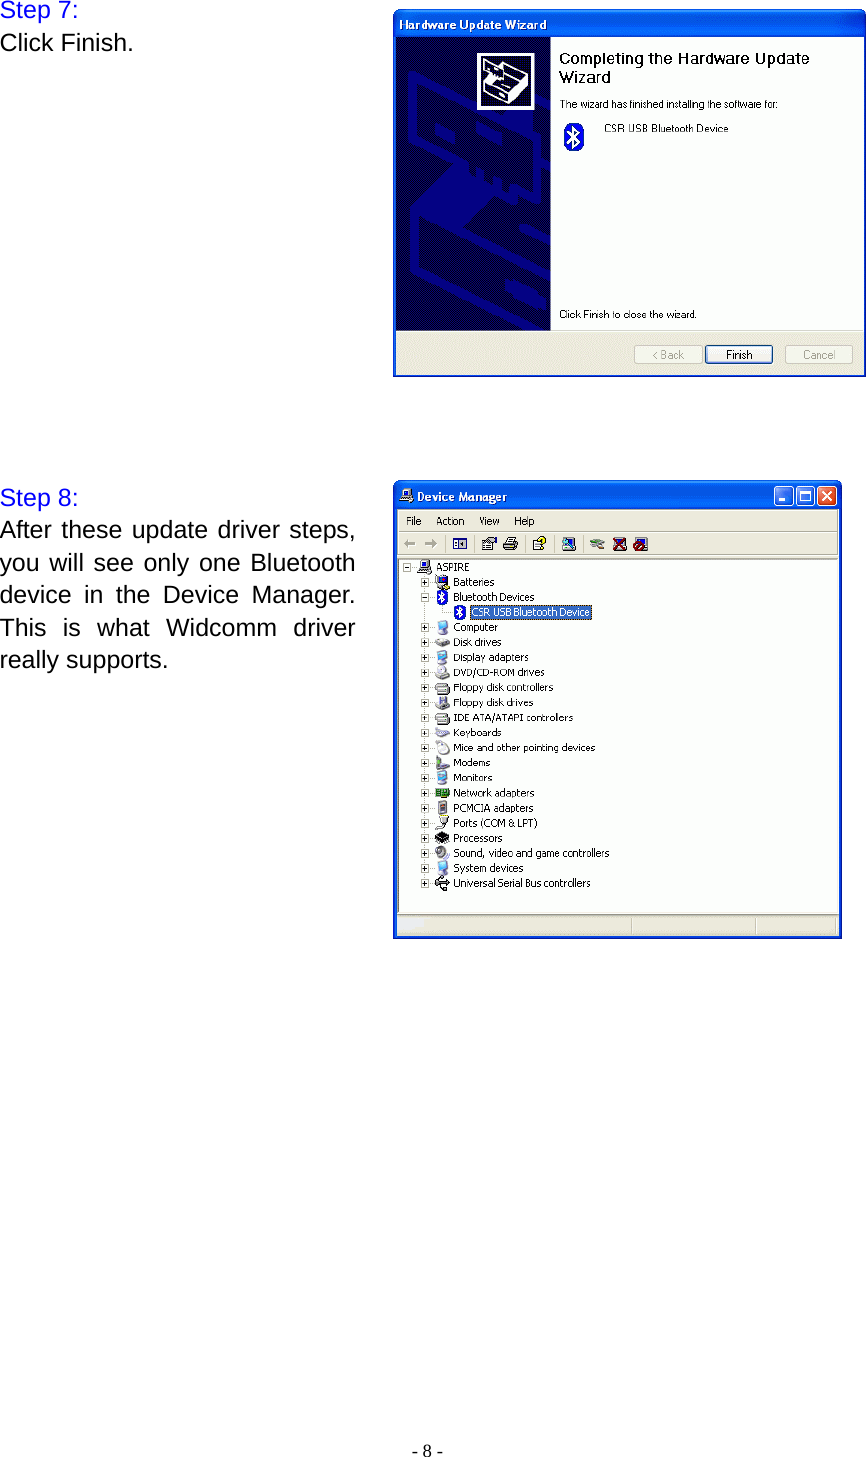  - 8 - Step 7: Click Finish.              Step 8: After these update driver steps, you will see only one Bluetooth device in the Device Manager. This is what Widcomm driver really supports.                       